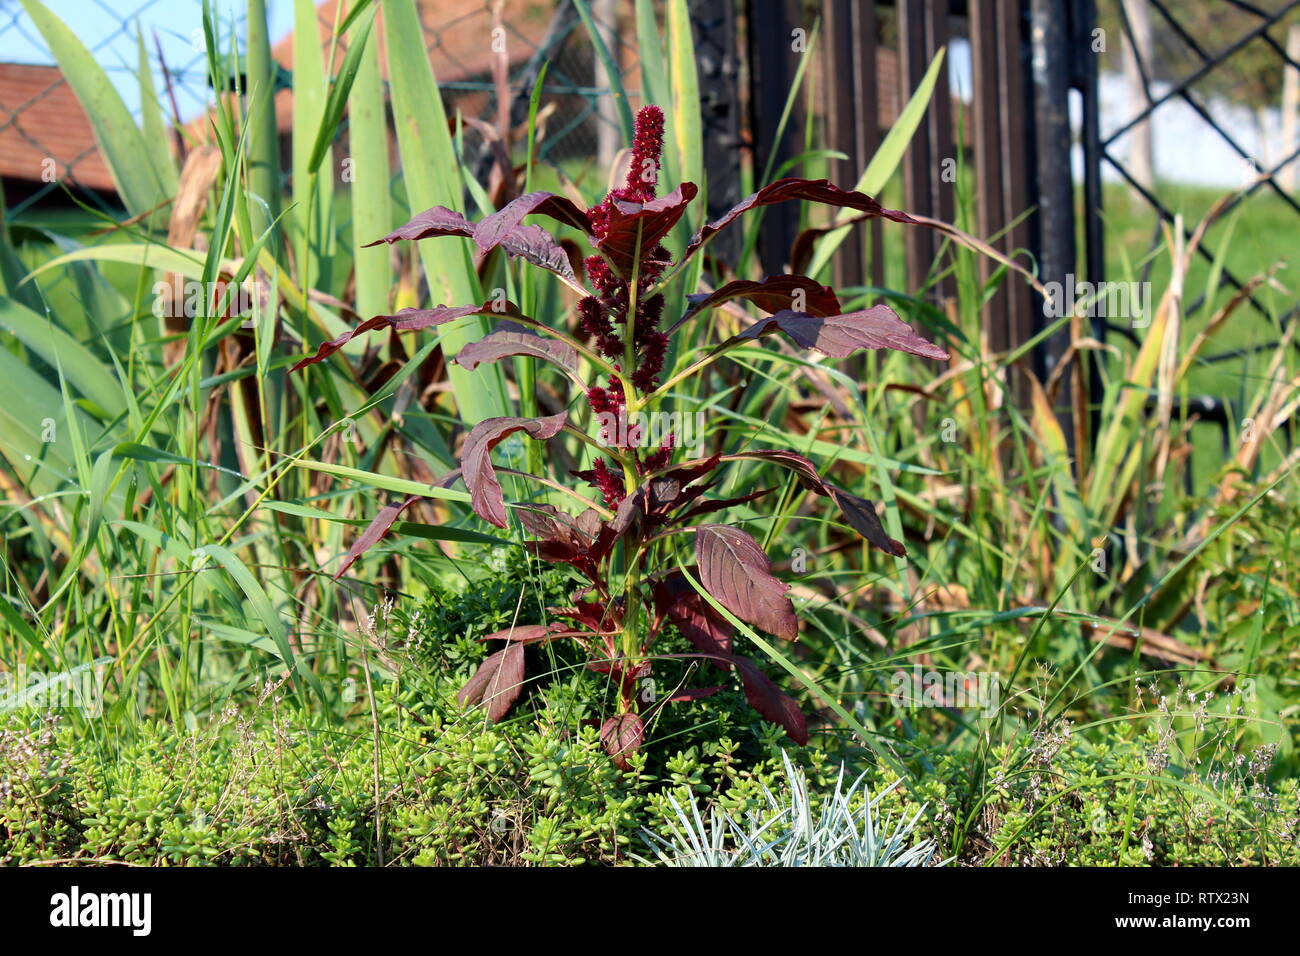 Amaranth or Amaranthus cosmopolitan genus of annual plant with flowers arranged in colourful bracts surrounded with thick large leaves and dense plant Stock Photo